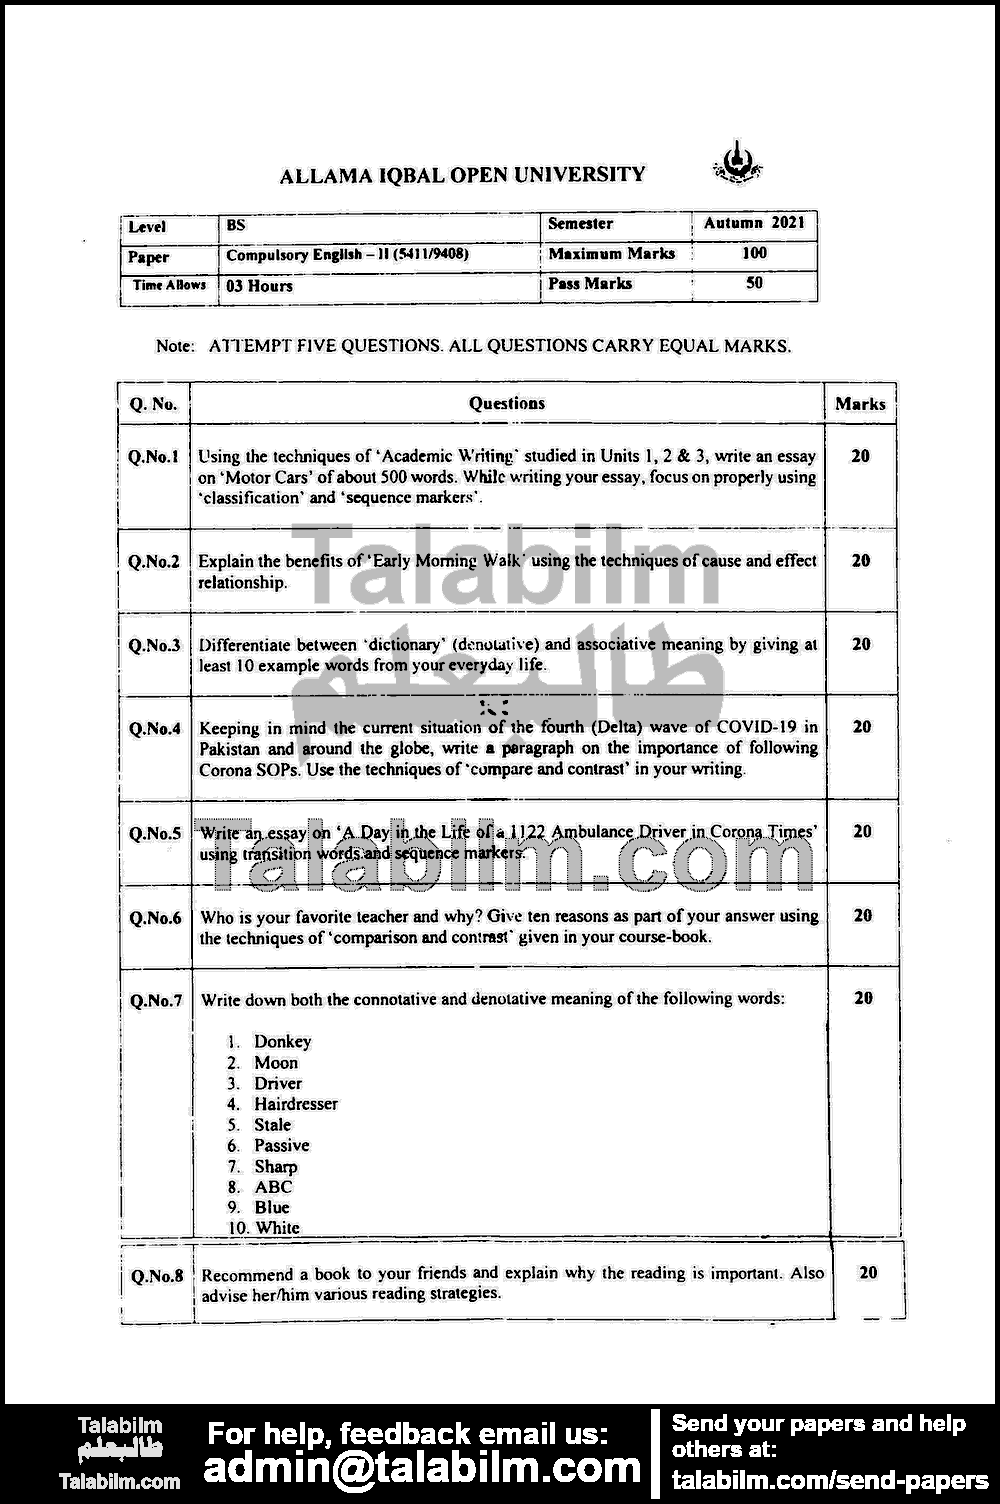 English–II (ODL) 9408 past paper for Autumn 2021